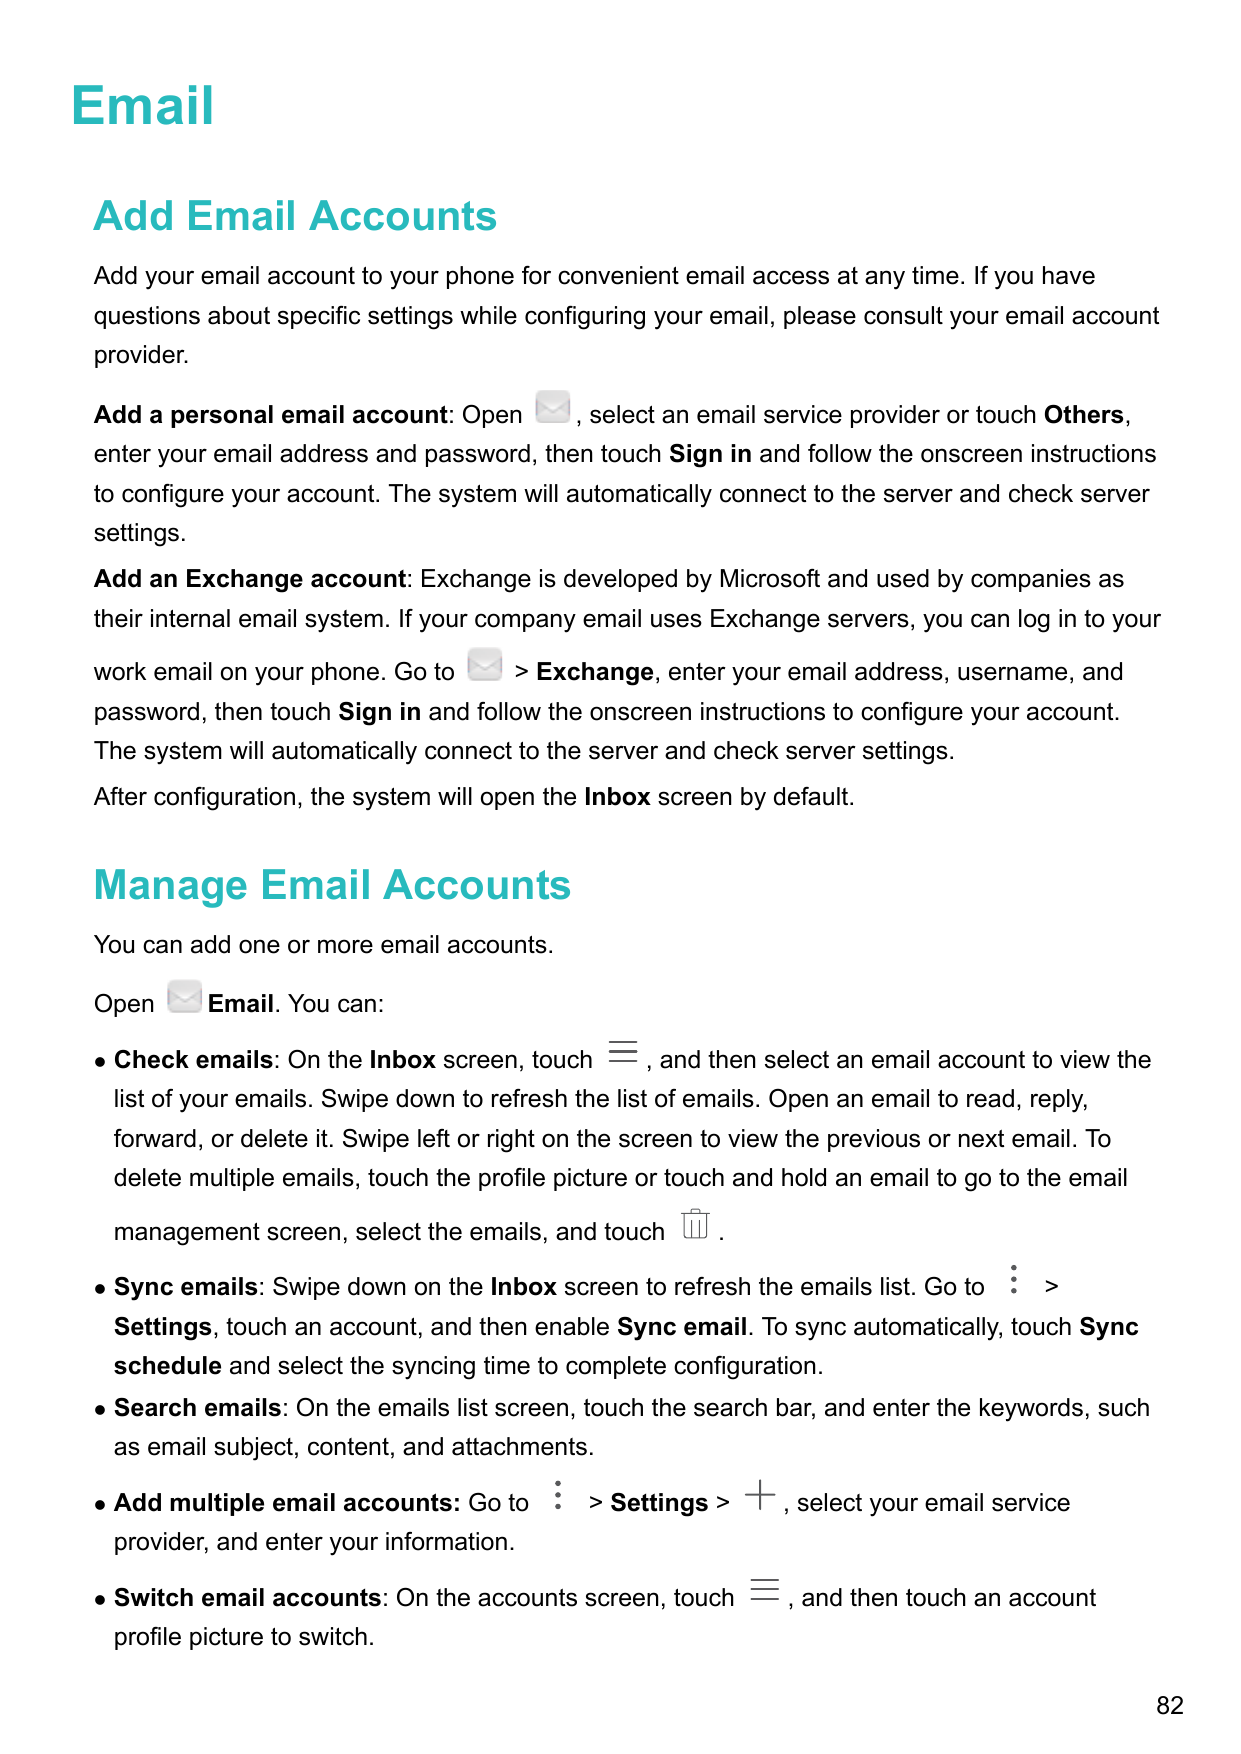 EmailAdd Email AccountsAdd your email account to your phone for convenient email access at any time. If you havequestions about 